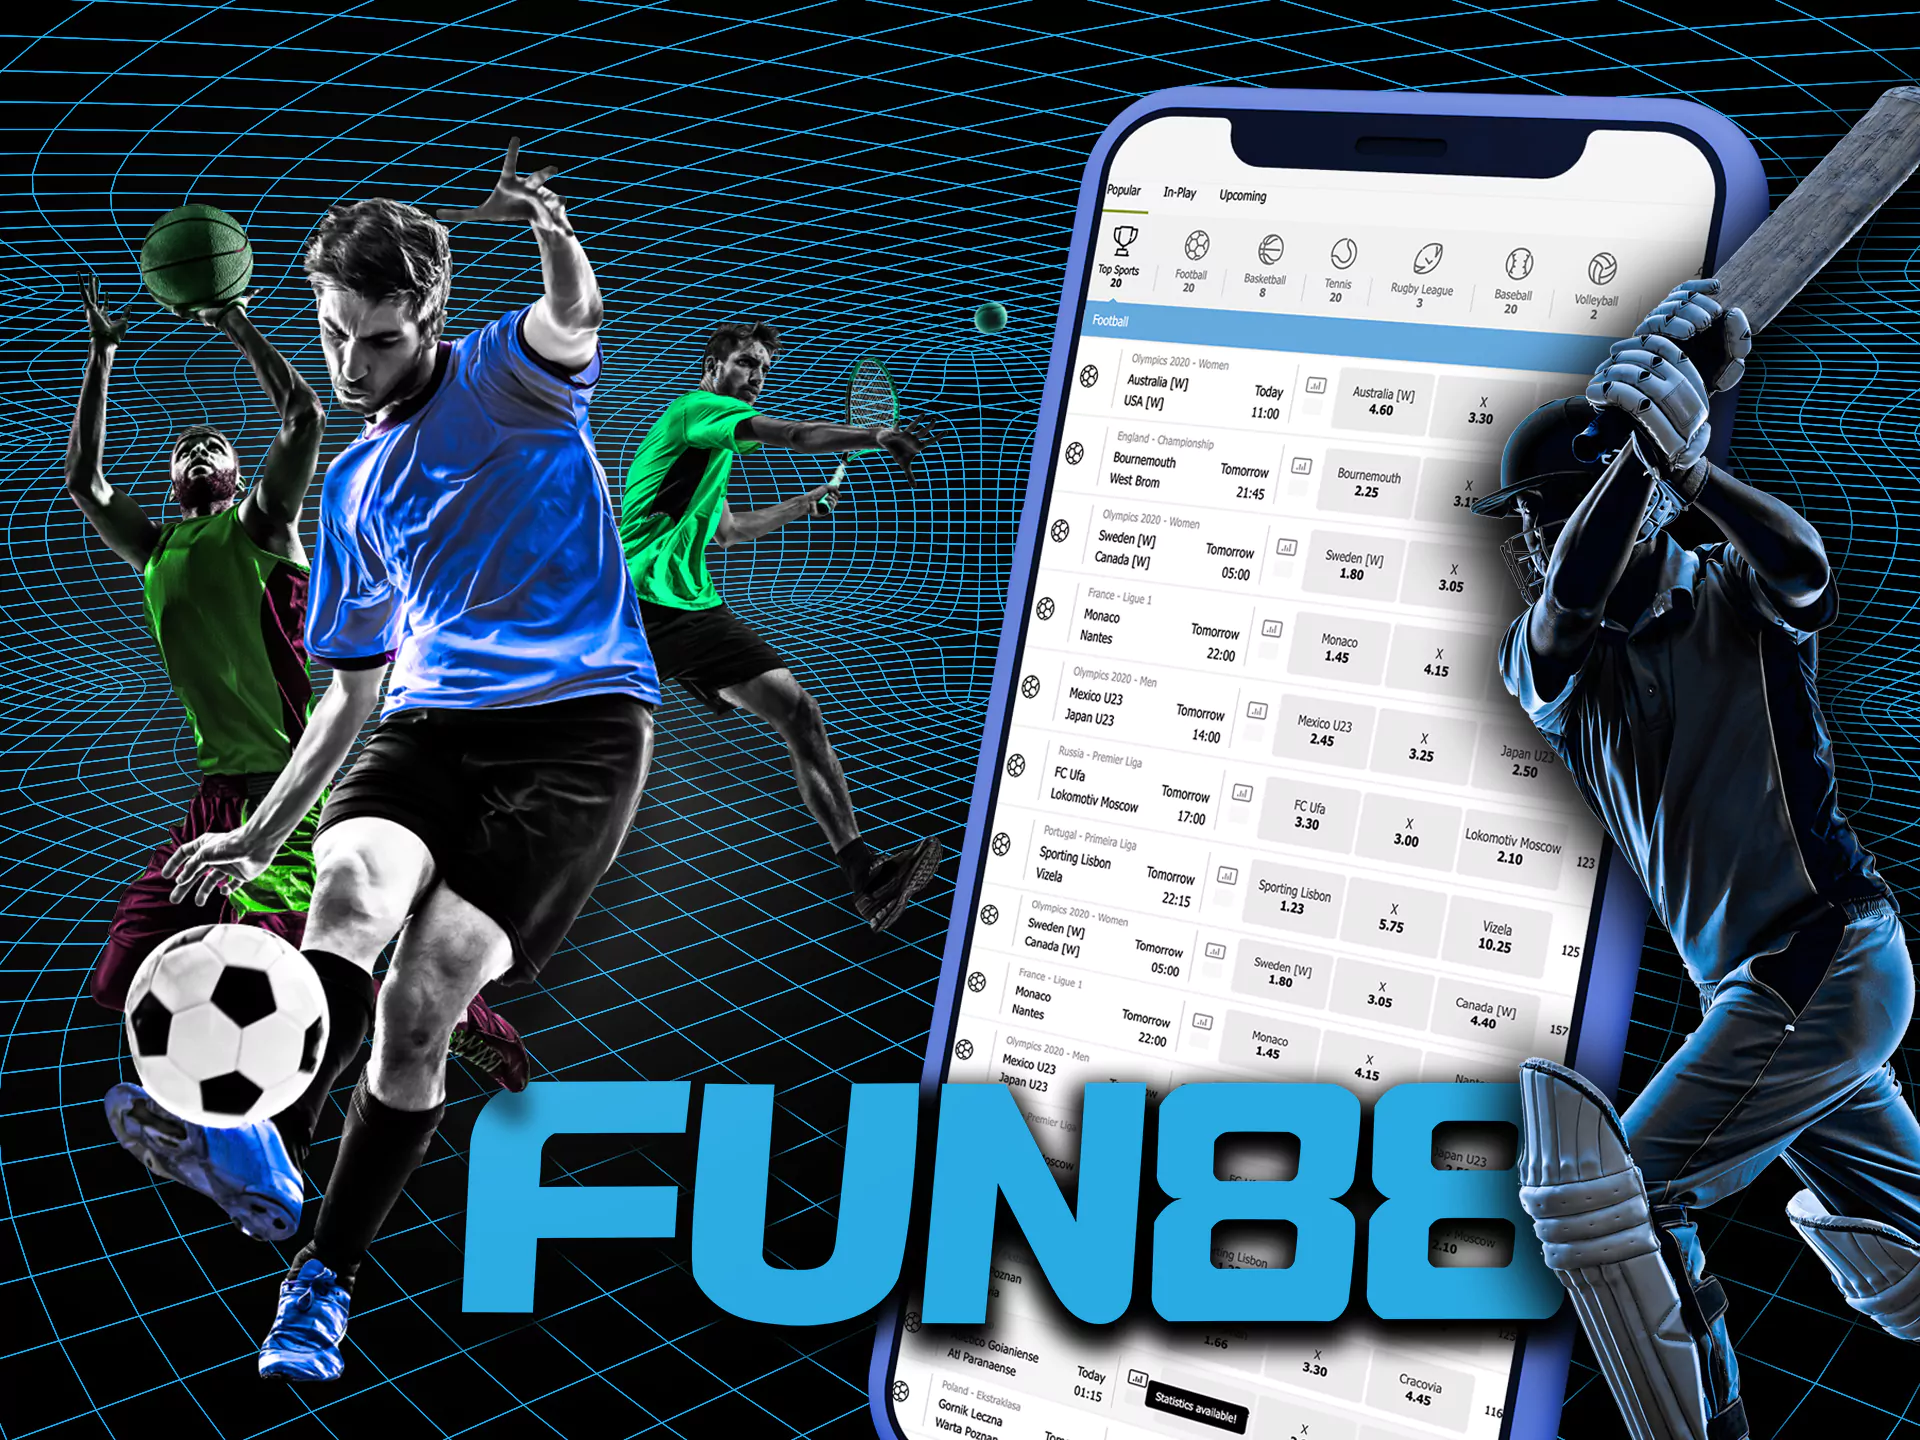 You can choose one of a long list of available sports disciplines in Fun88.